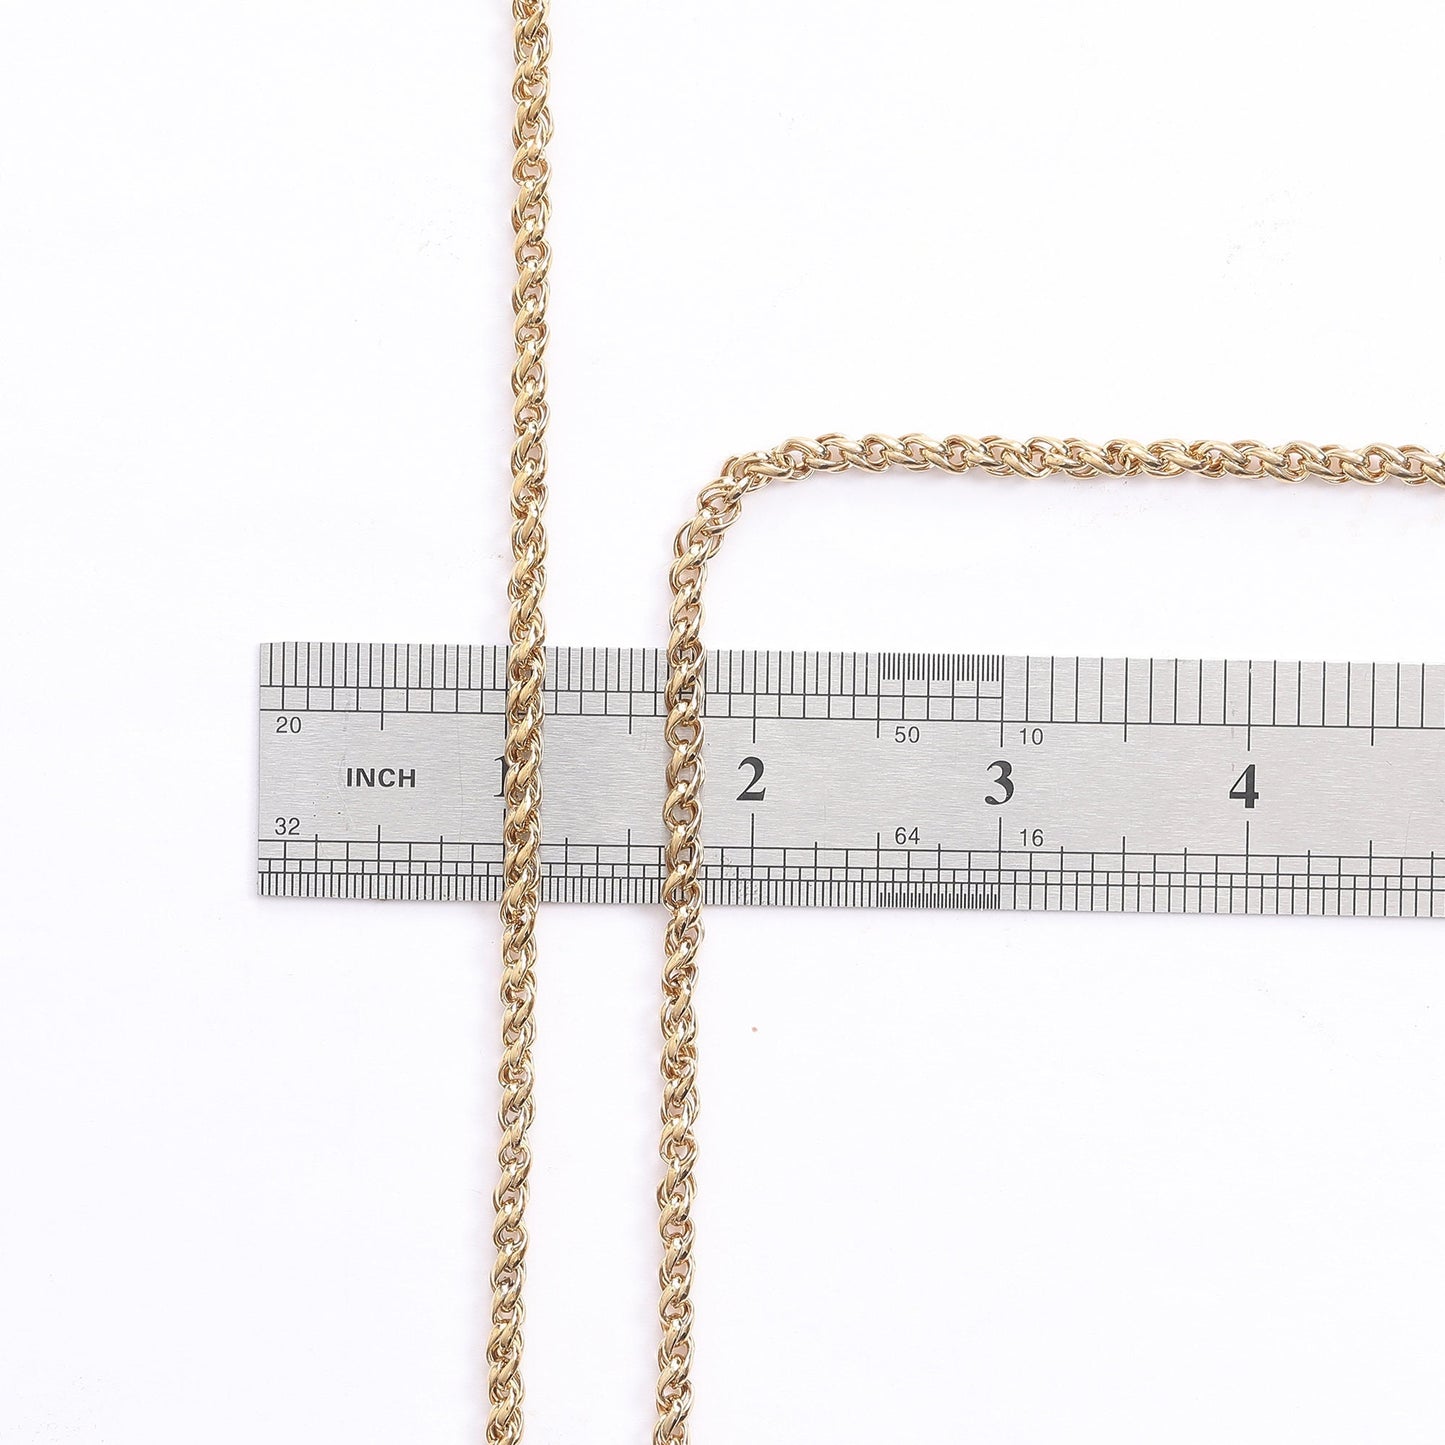 18k Gold Plated chain wheat chain thickness 4mm findings for jewelry making gfc091 sold by the foot